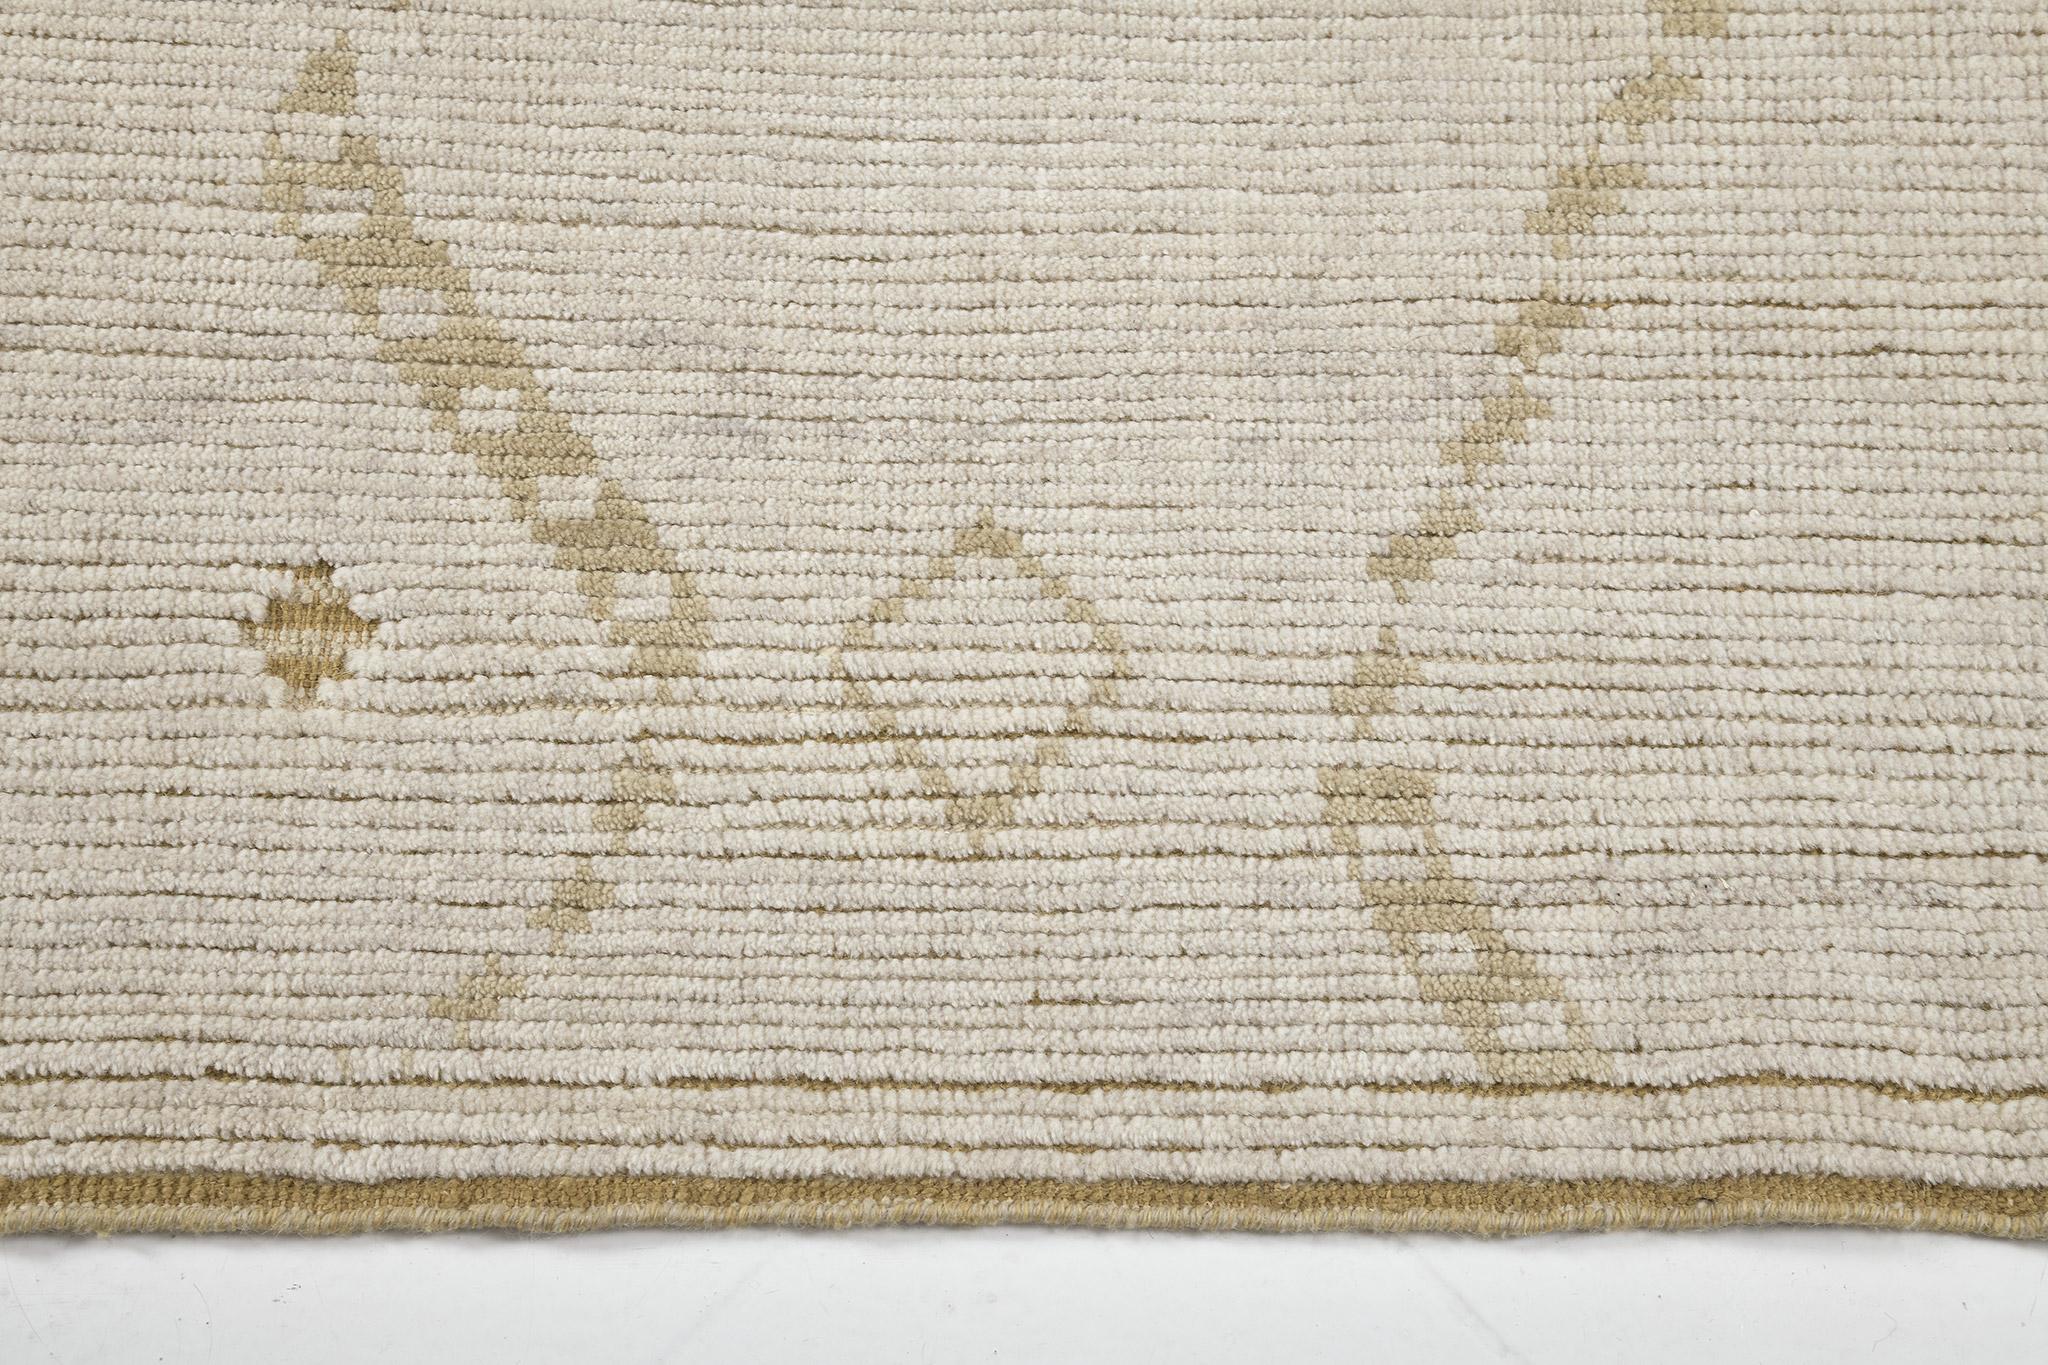 Albarino in Estancia collection features an all over aesthetic pattern in bone and light fawn. Lozenge patterns are featured in this mesmerizing rug representing The Eye in ancient Berber motifs that wards off the evil eye. Classy yet sophisticated,